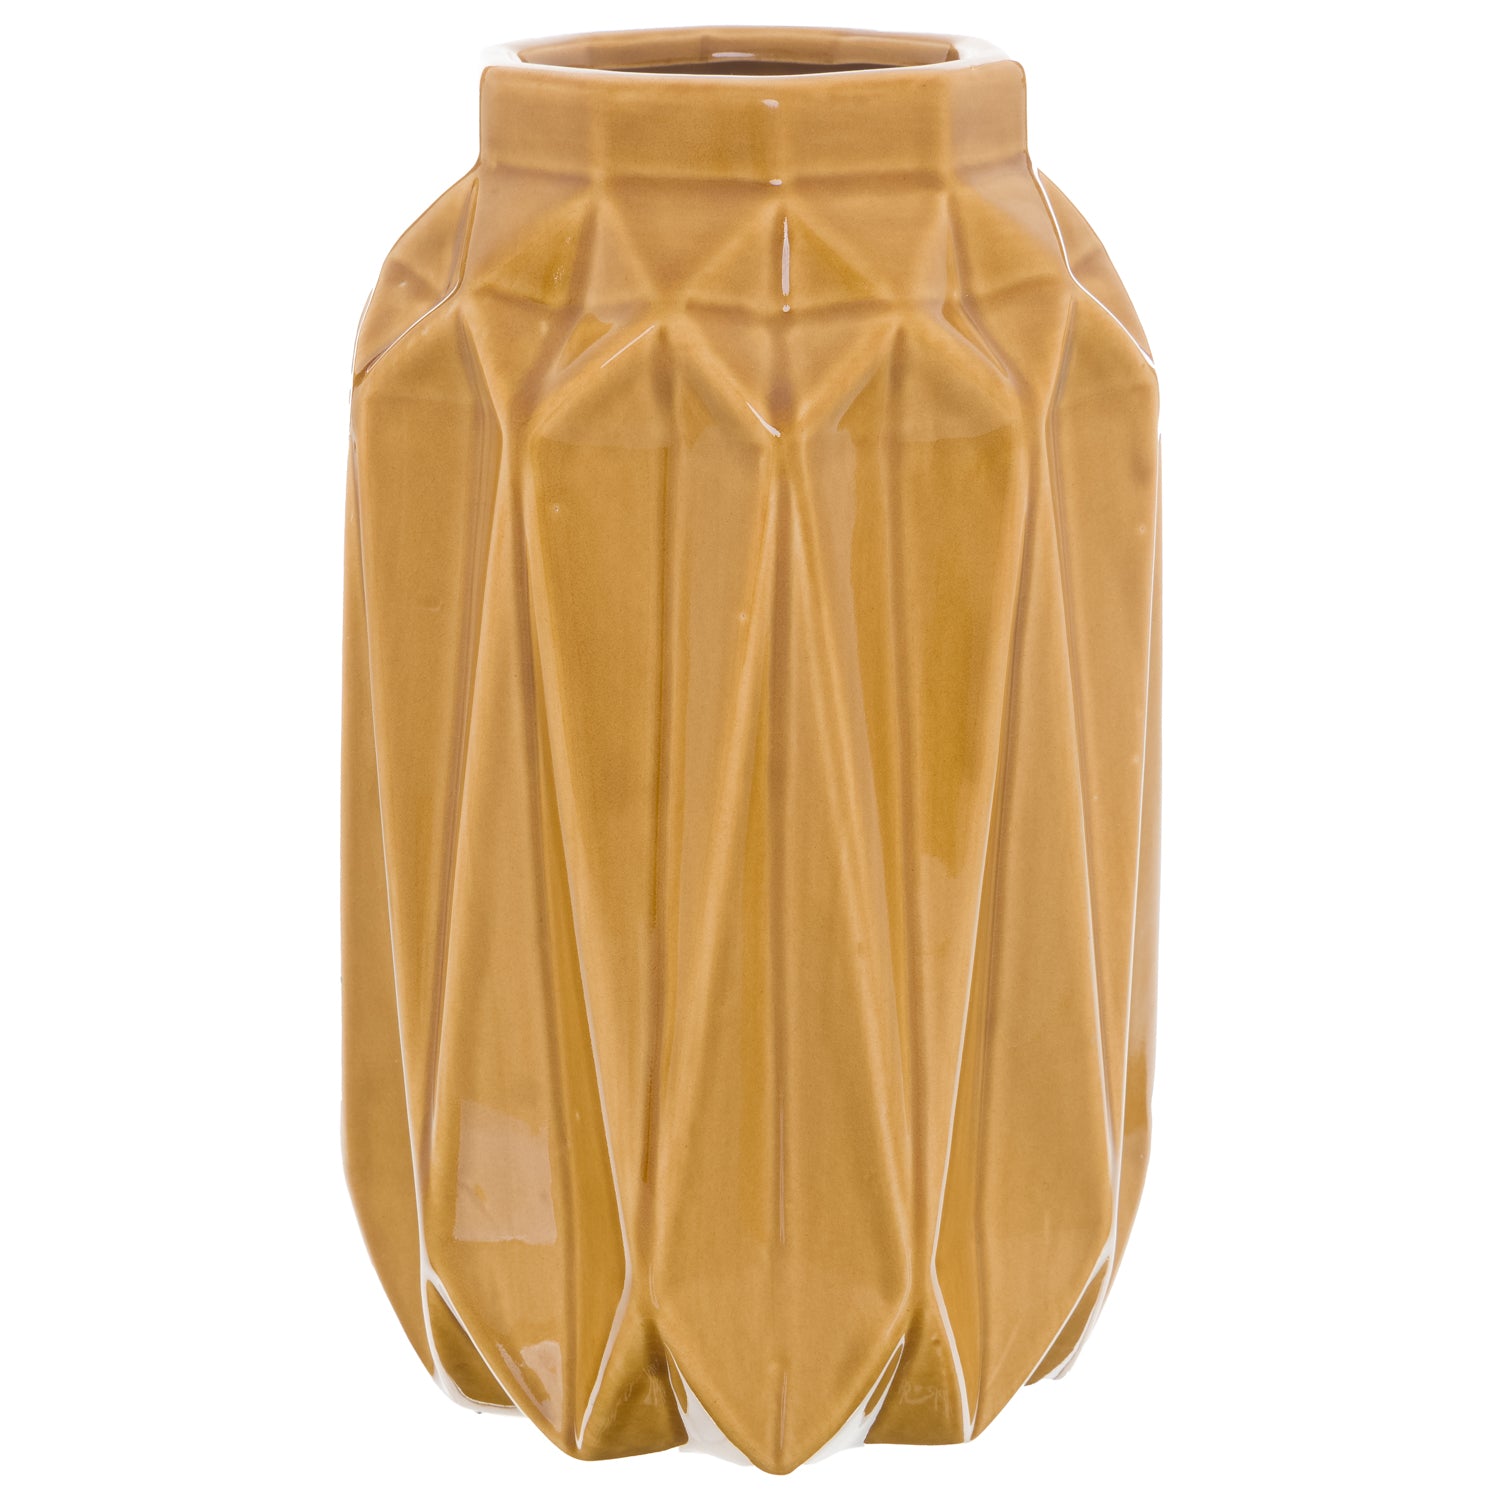 View Seville Collection Ochre Vase information